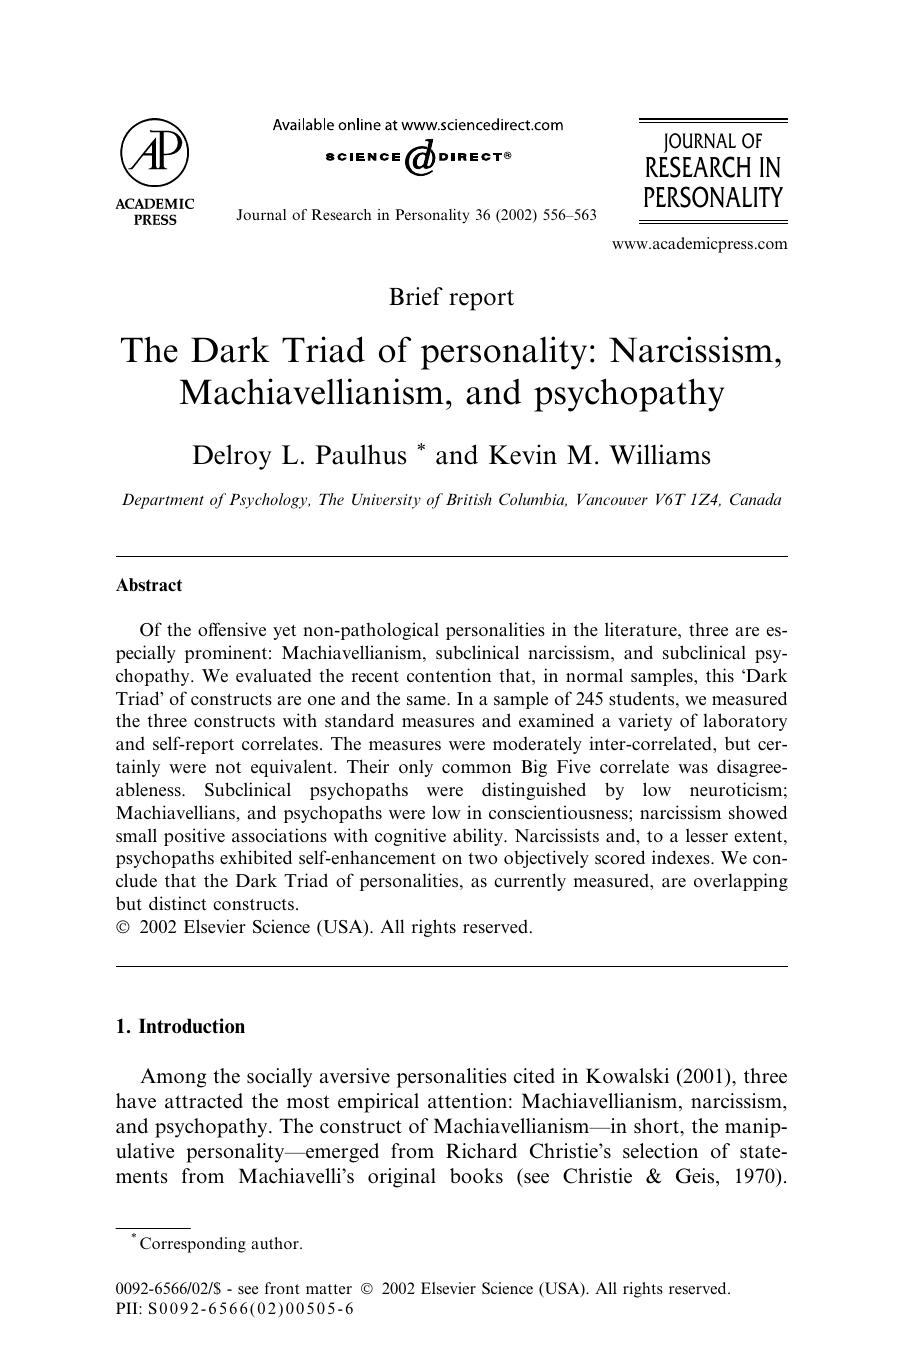 The Dark Triad of personality: Narcissism, Machavellianism, and psychopathy - Paper